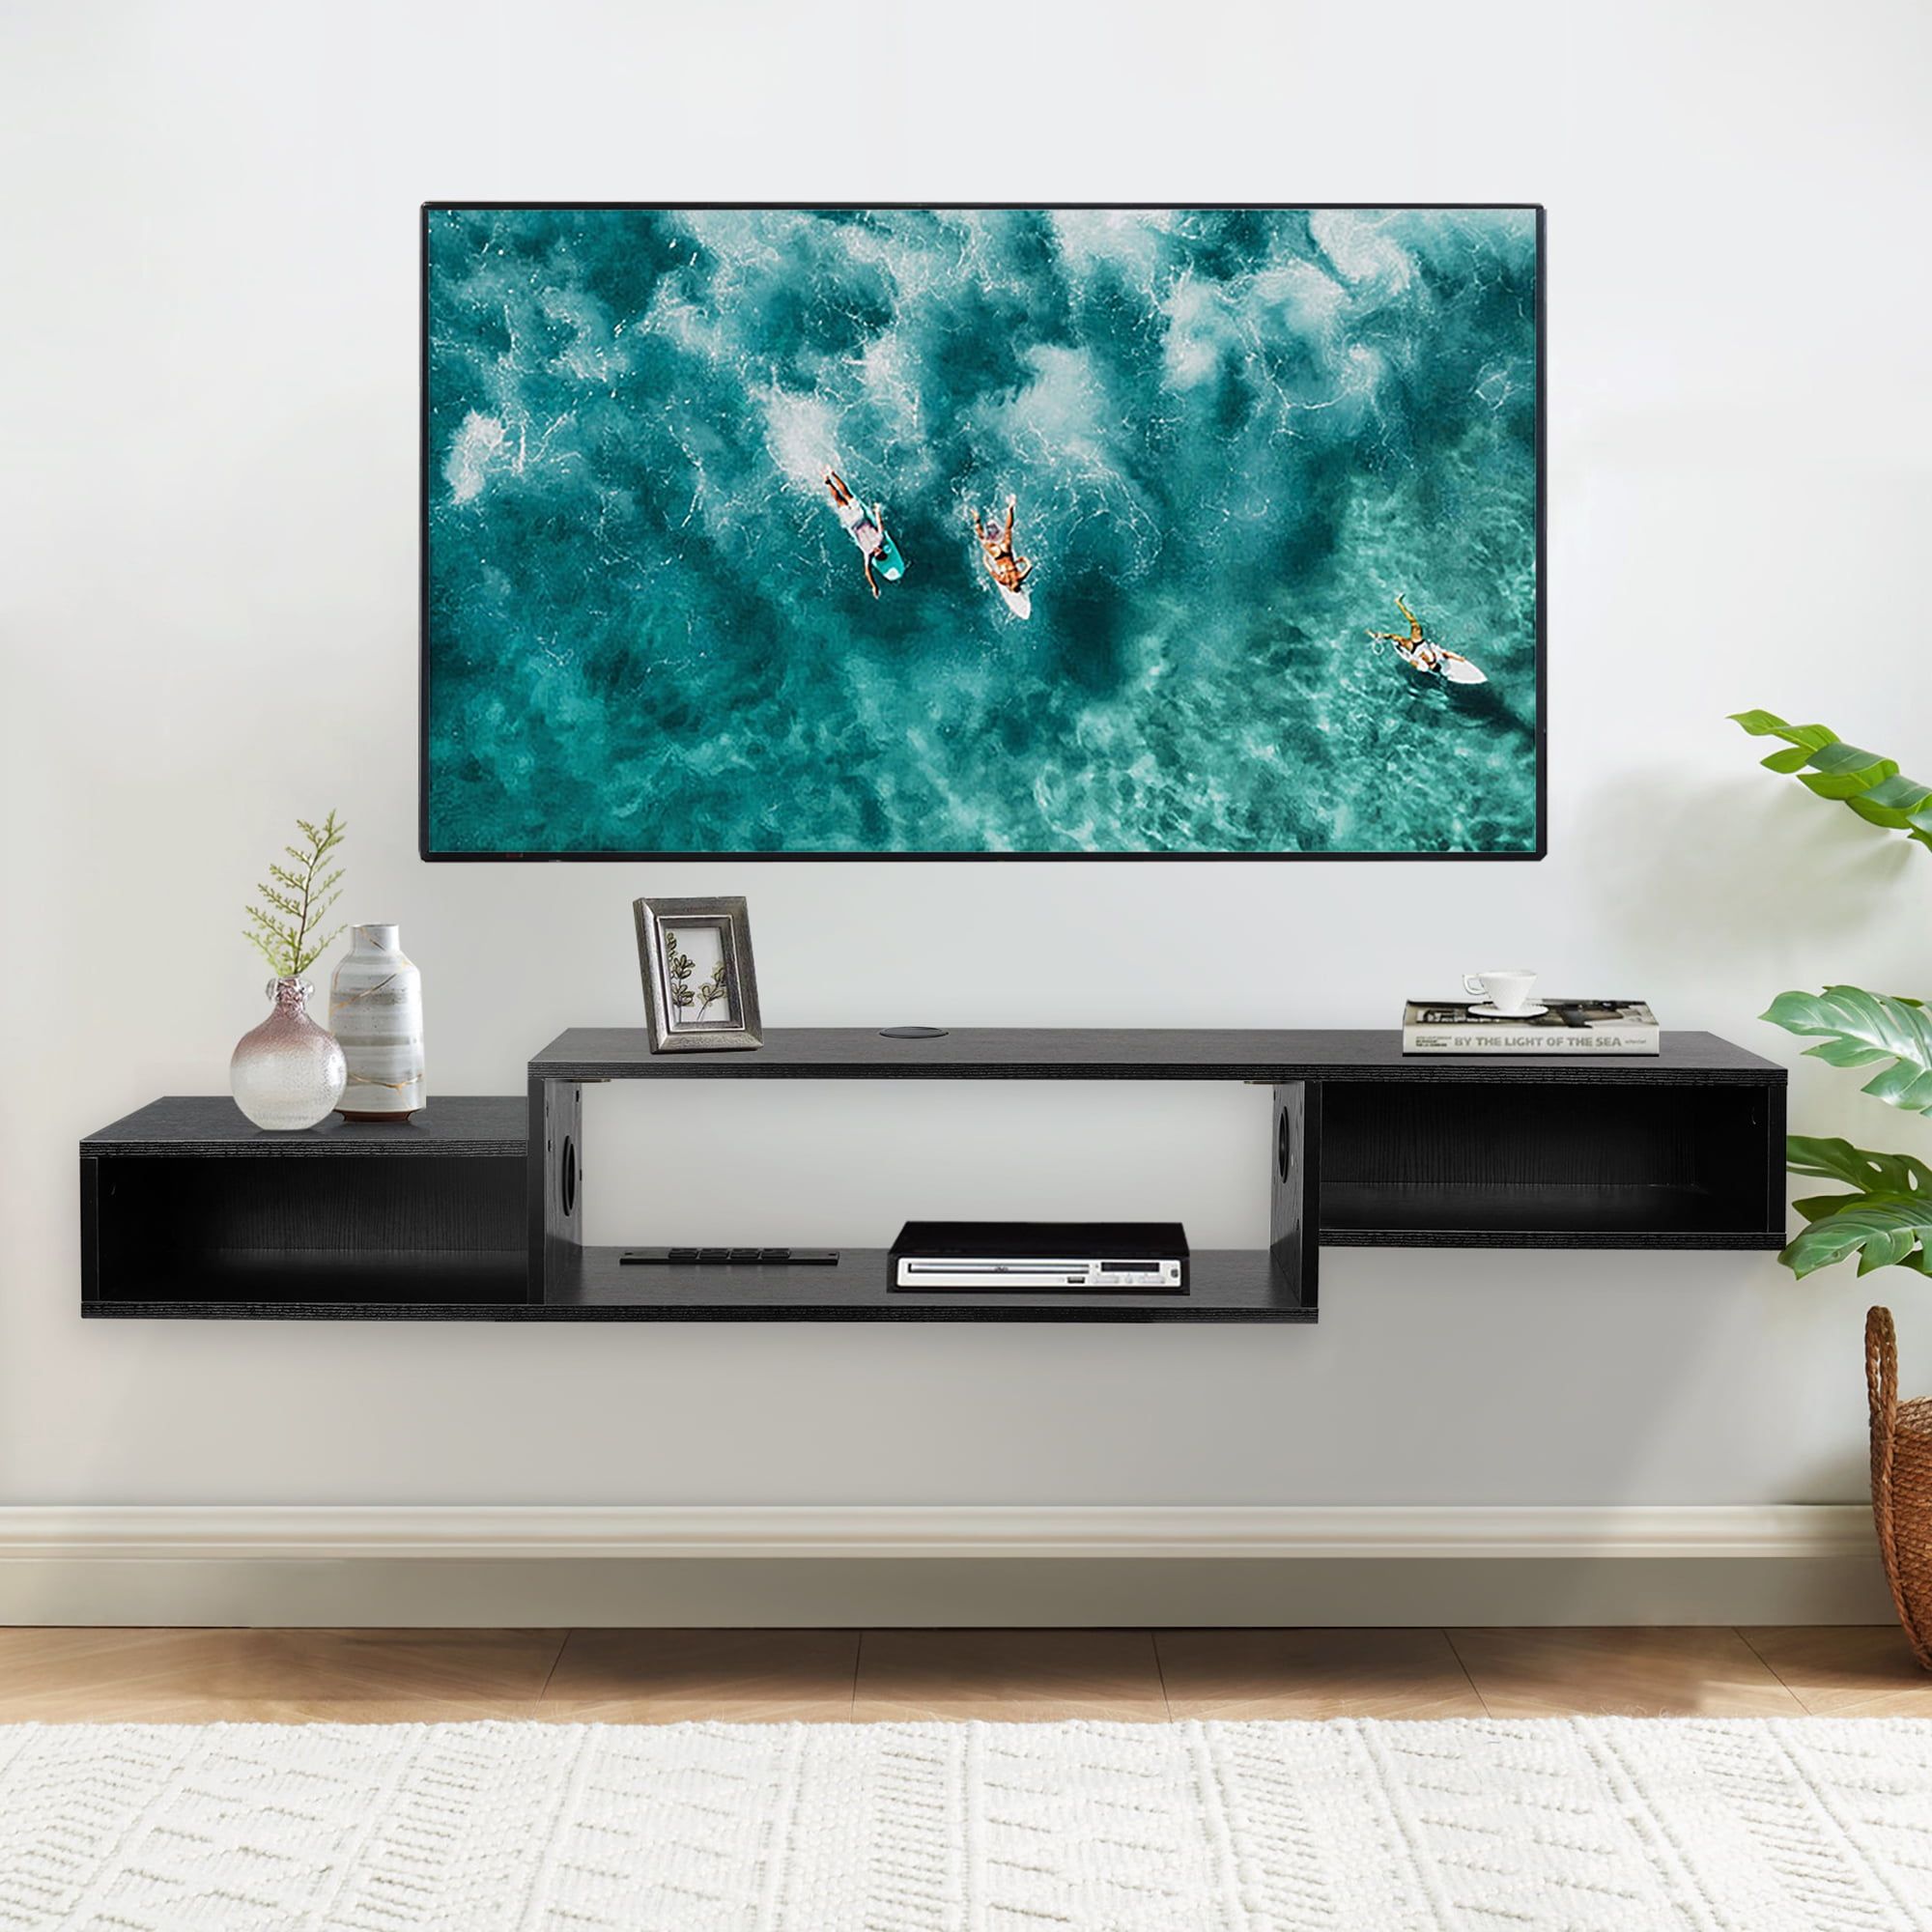 Richya Floating Tv Stand Wall Mounted Media Console,Screen Size Up To 60",  Product Length:59",Black – Walmart Regarding Wall Mounted Floating Tv Stands (View 8 of 15)